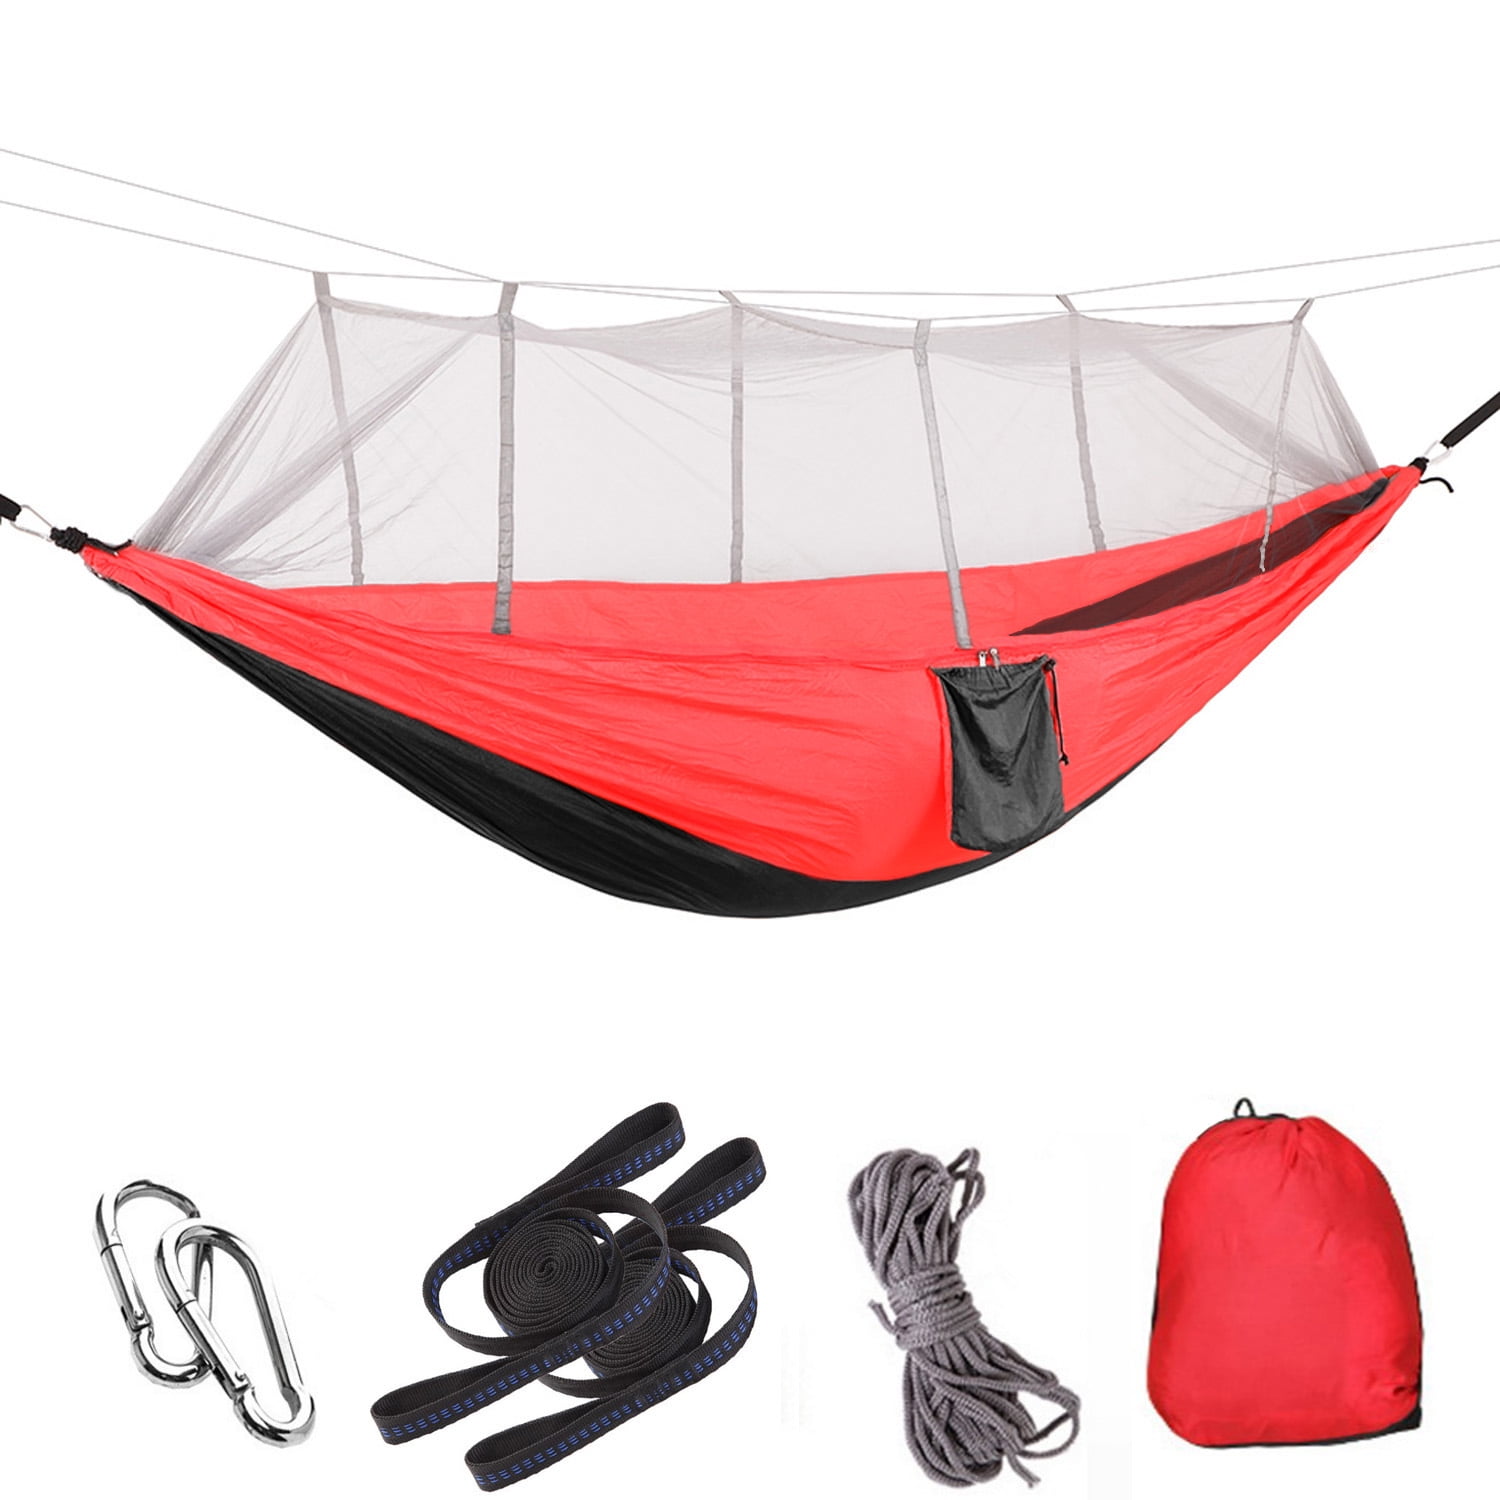 Portable Double Hammock with Mosquito Net Netting Hanging Bed Outdoor Camping US